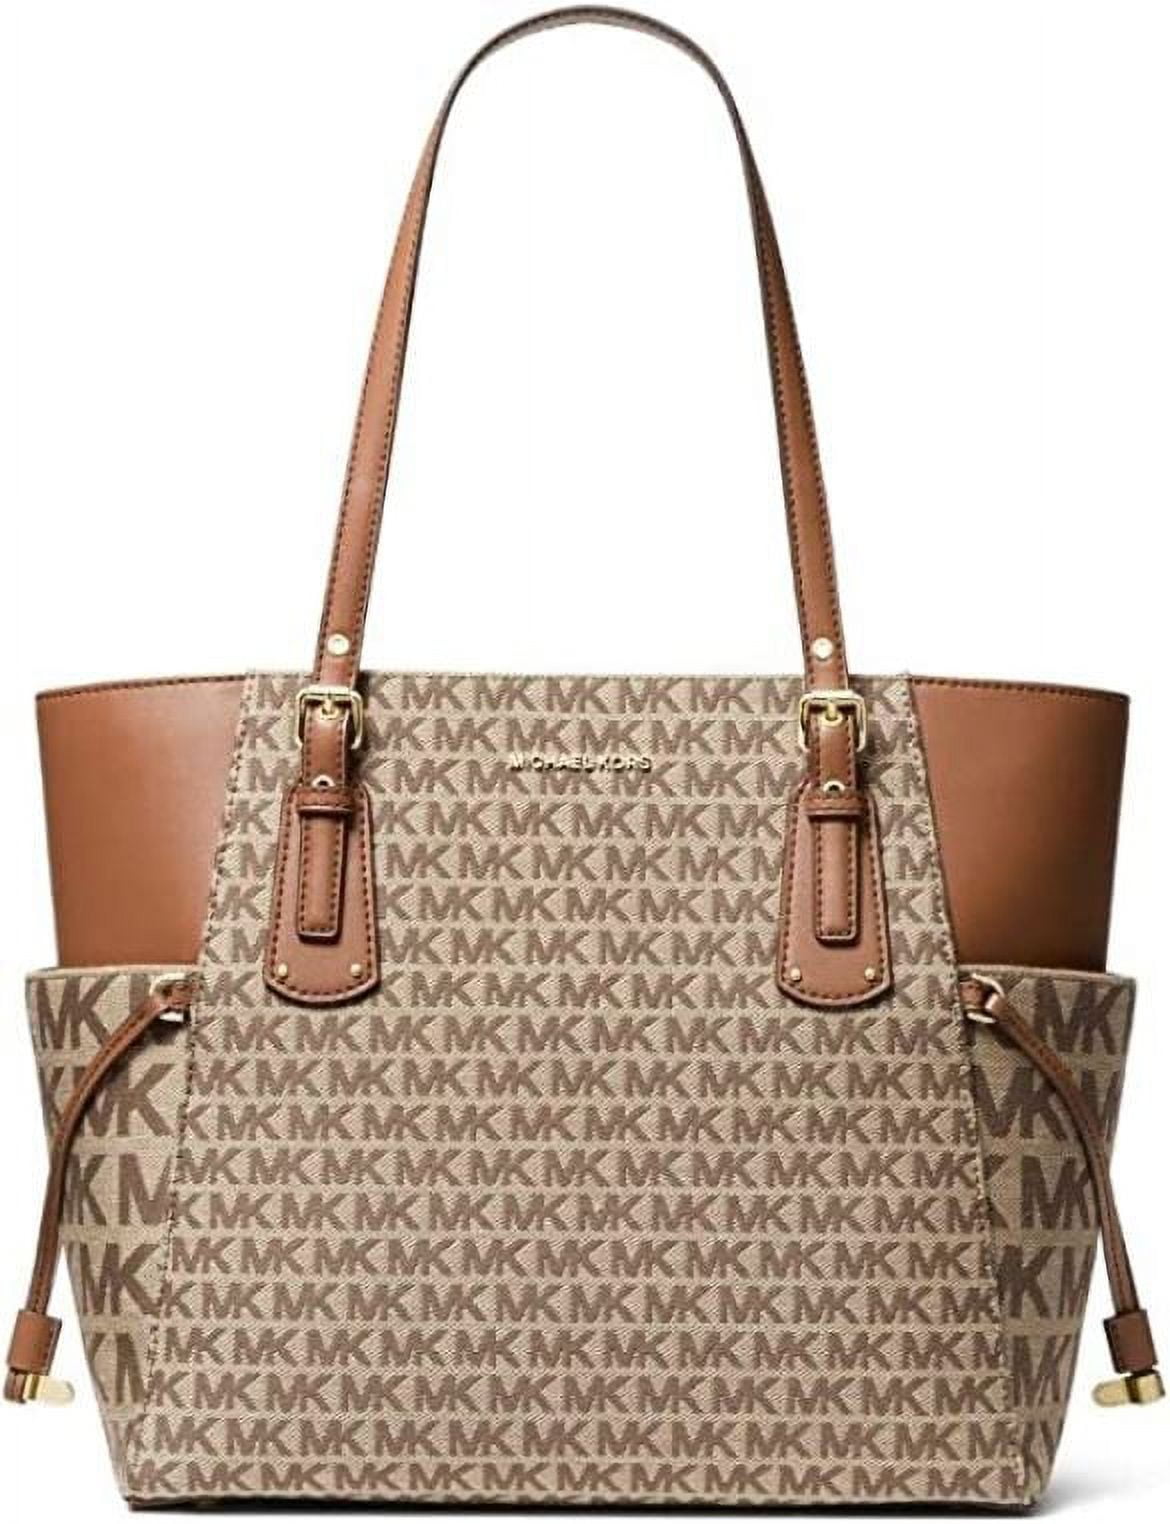  MICHAEL MICHAEL KORS Women's Voyager Medium Crossgrain Leather  Tote Bag, Chambray/Navy : Clothing, Shoes & Jewelry